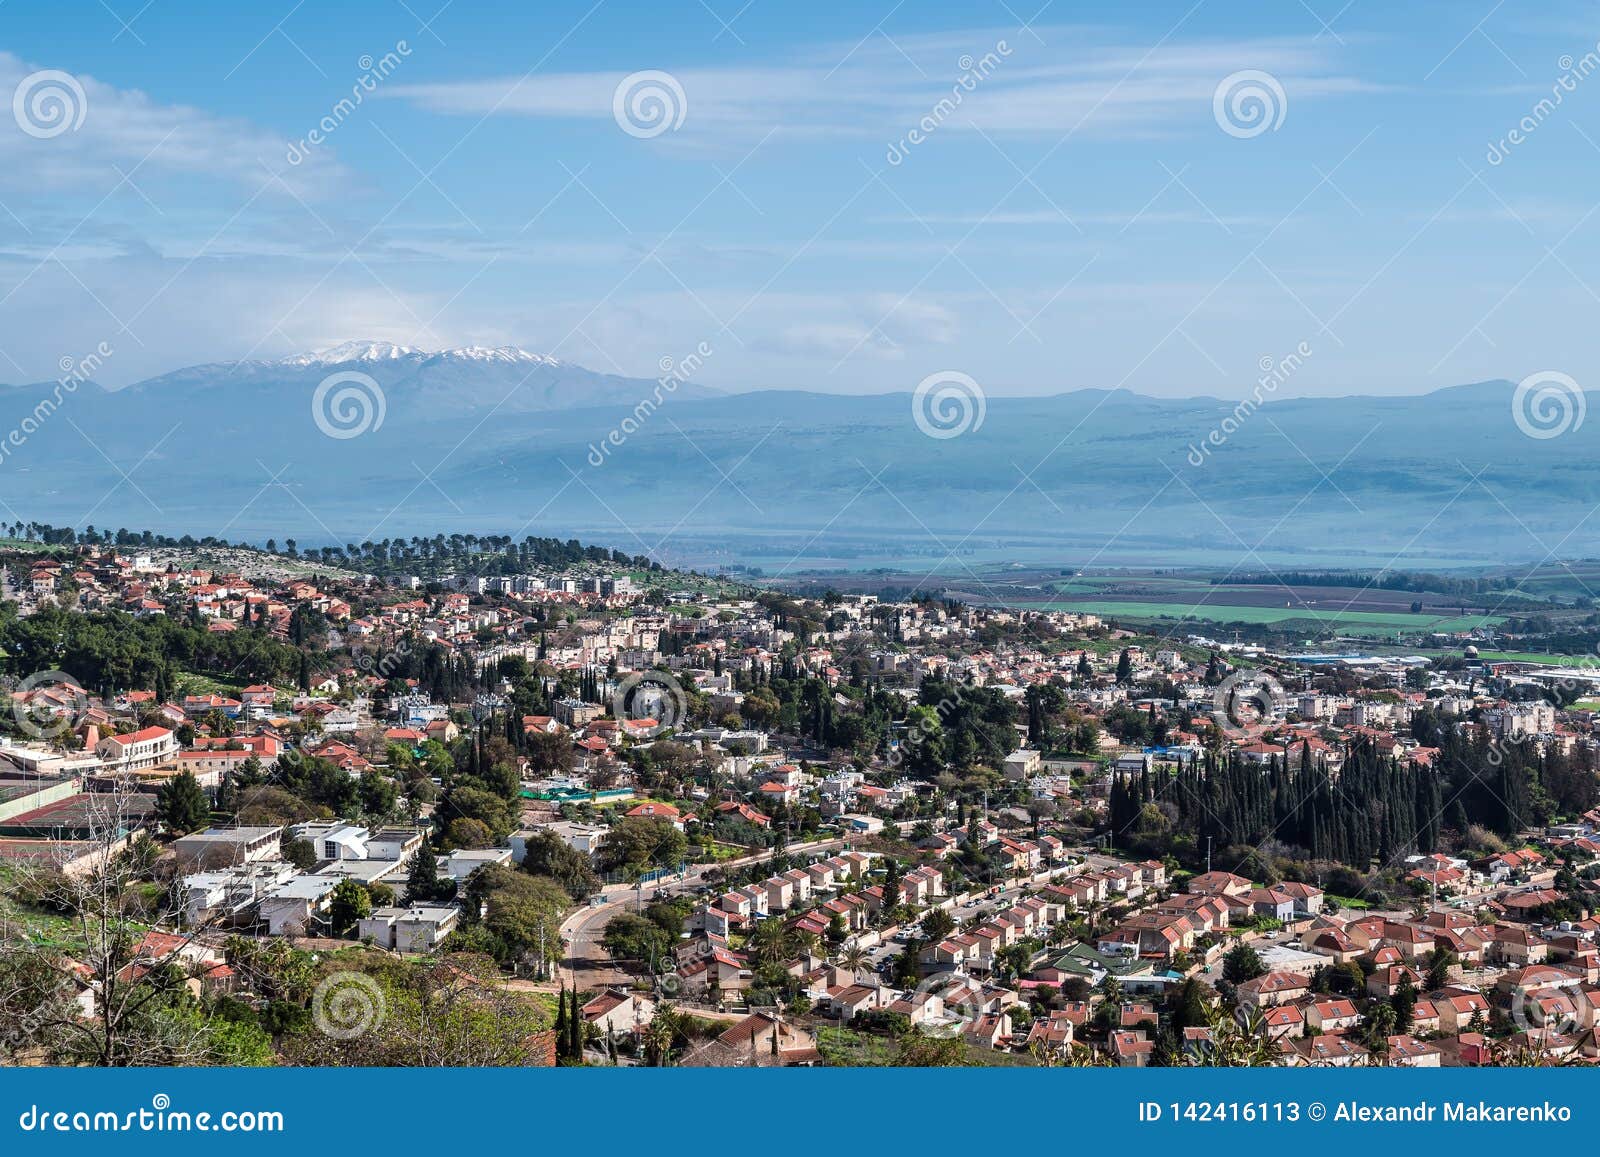 israel, rosh pinna, view of the hula valley, golan heights.